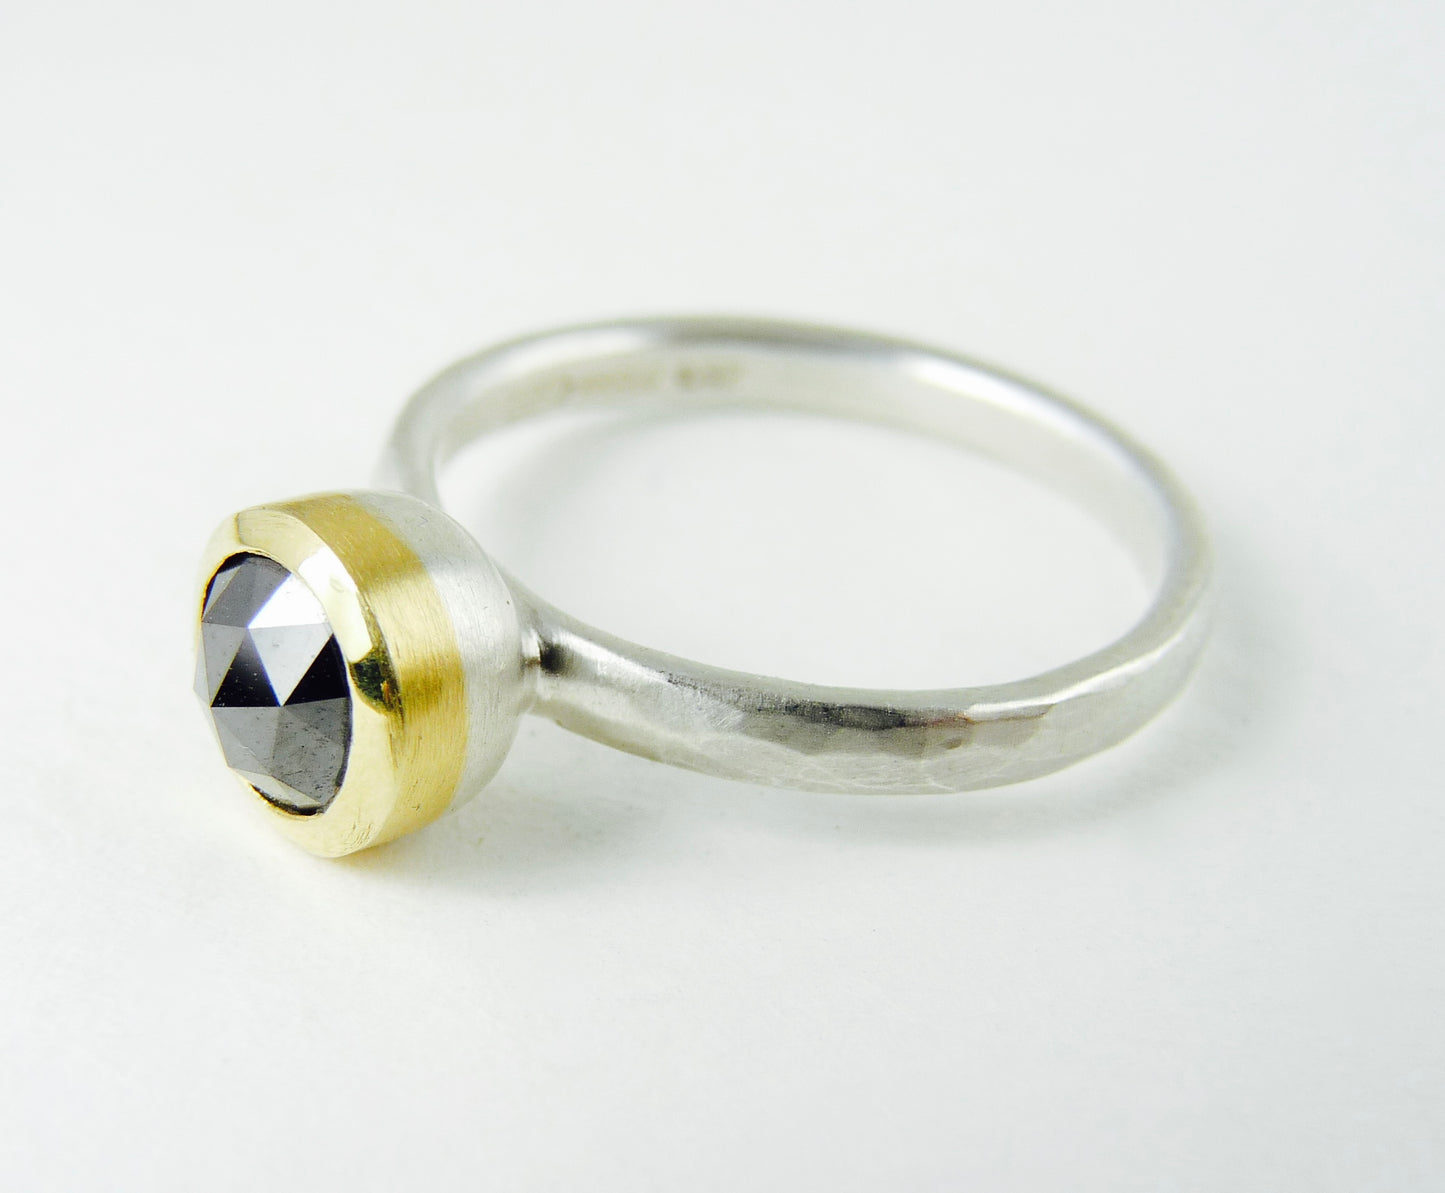 Rose Cut Black Diamond Ring in 18ct Gold and Silver